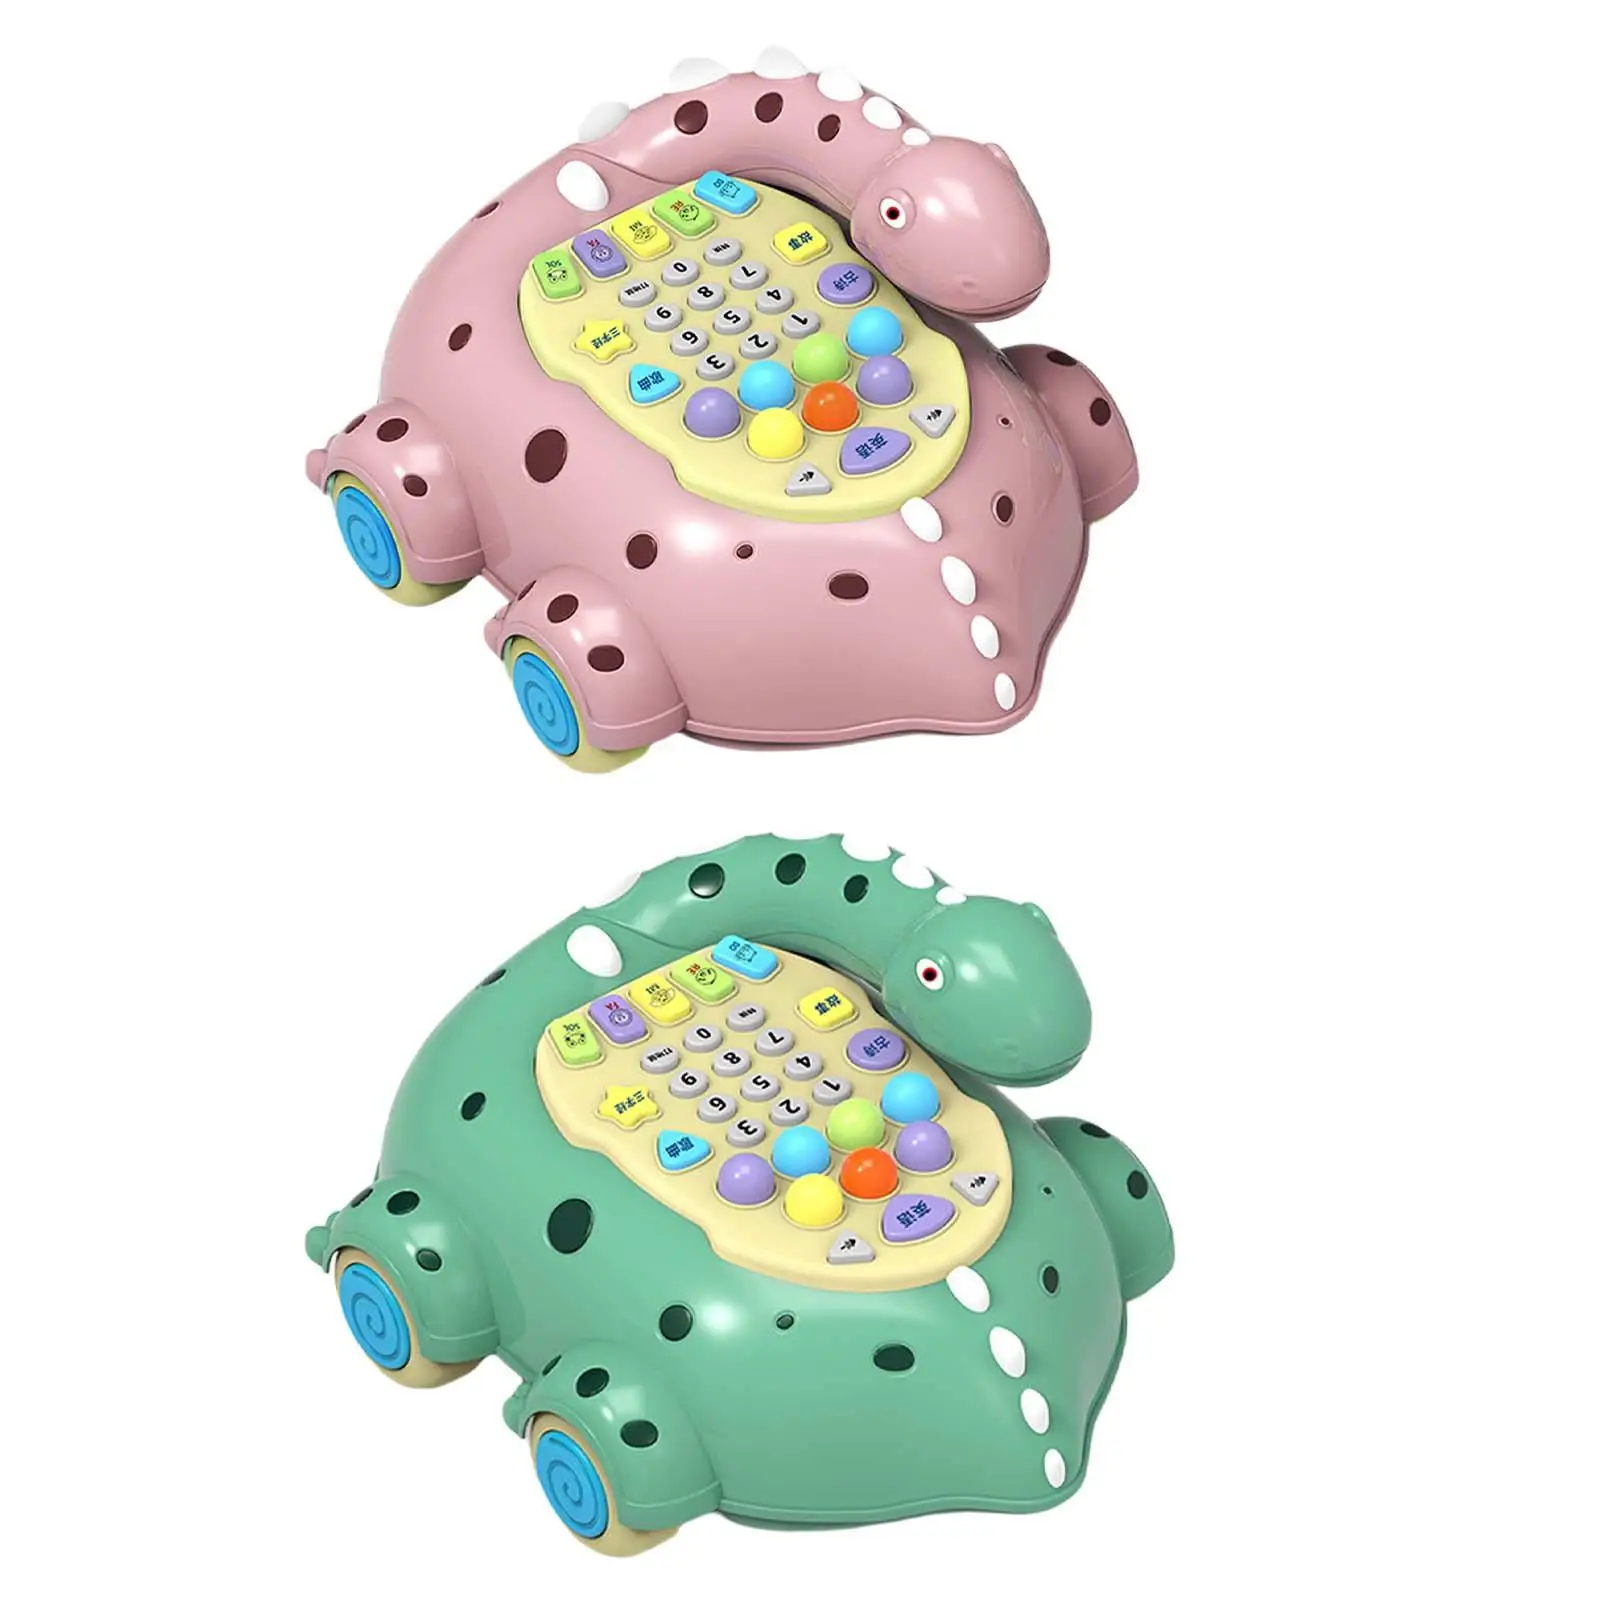 Music Light Phone Toy Educational Movable Fine Motor Skills Children Phone Toy for Game Education Activity Preschool Gift